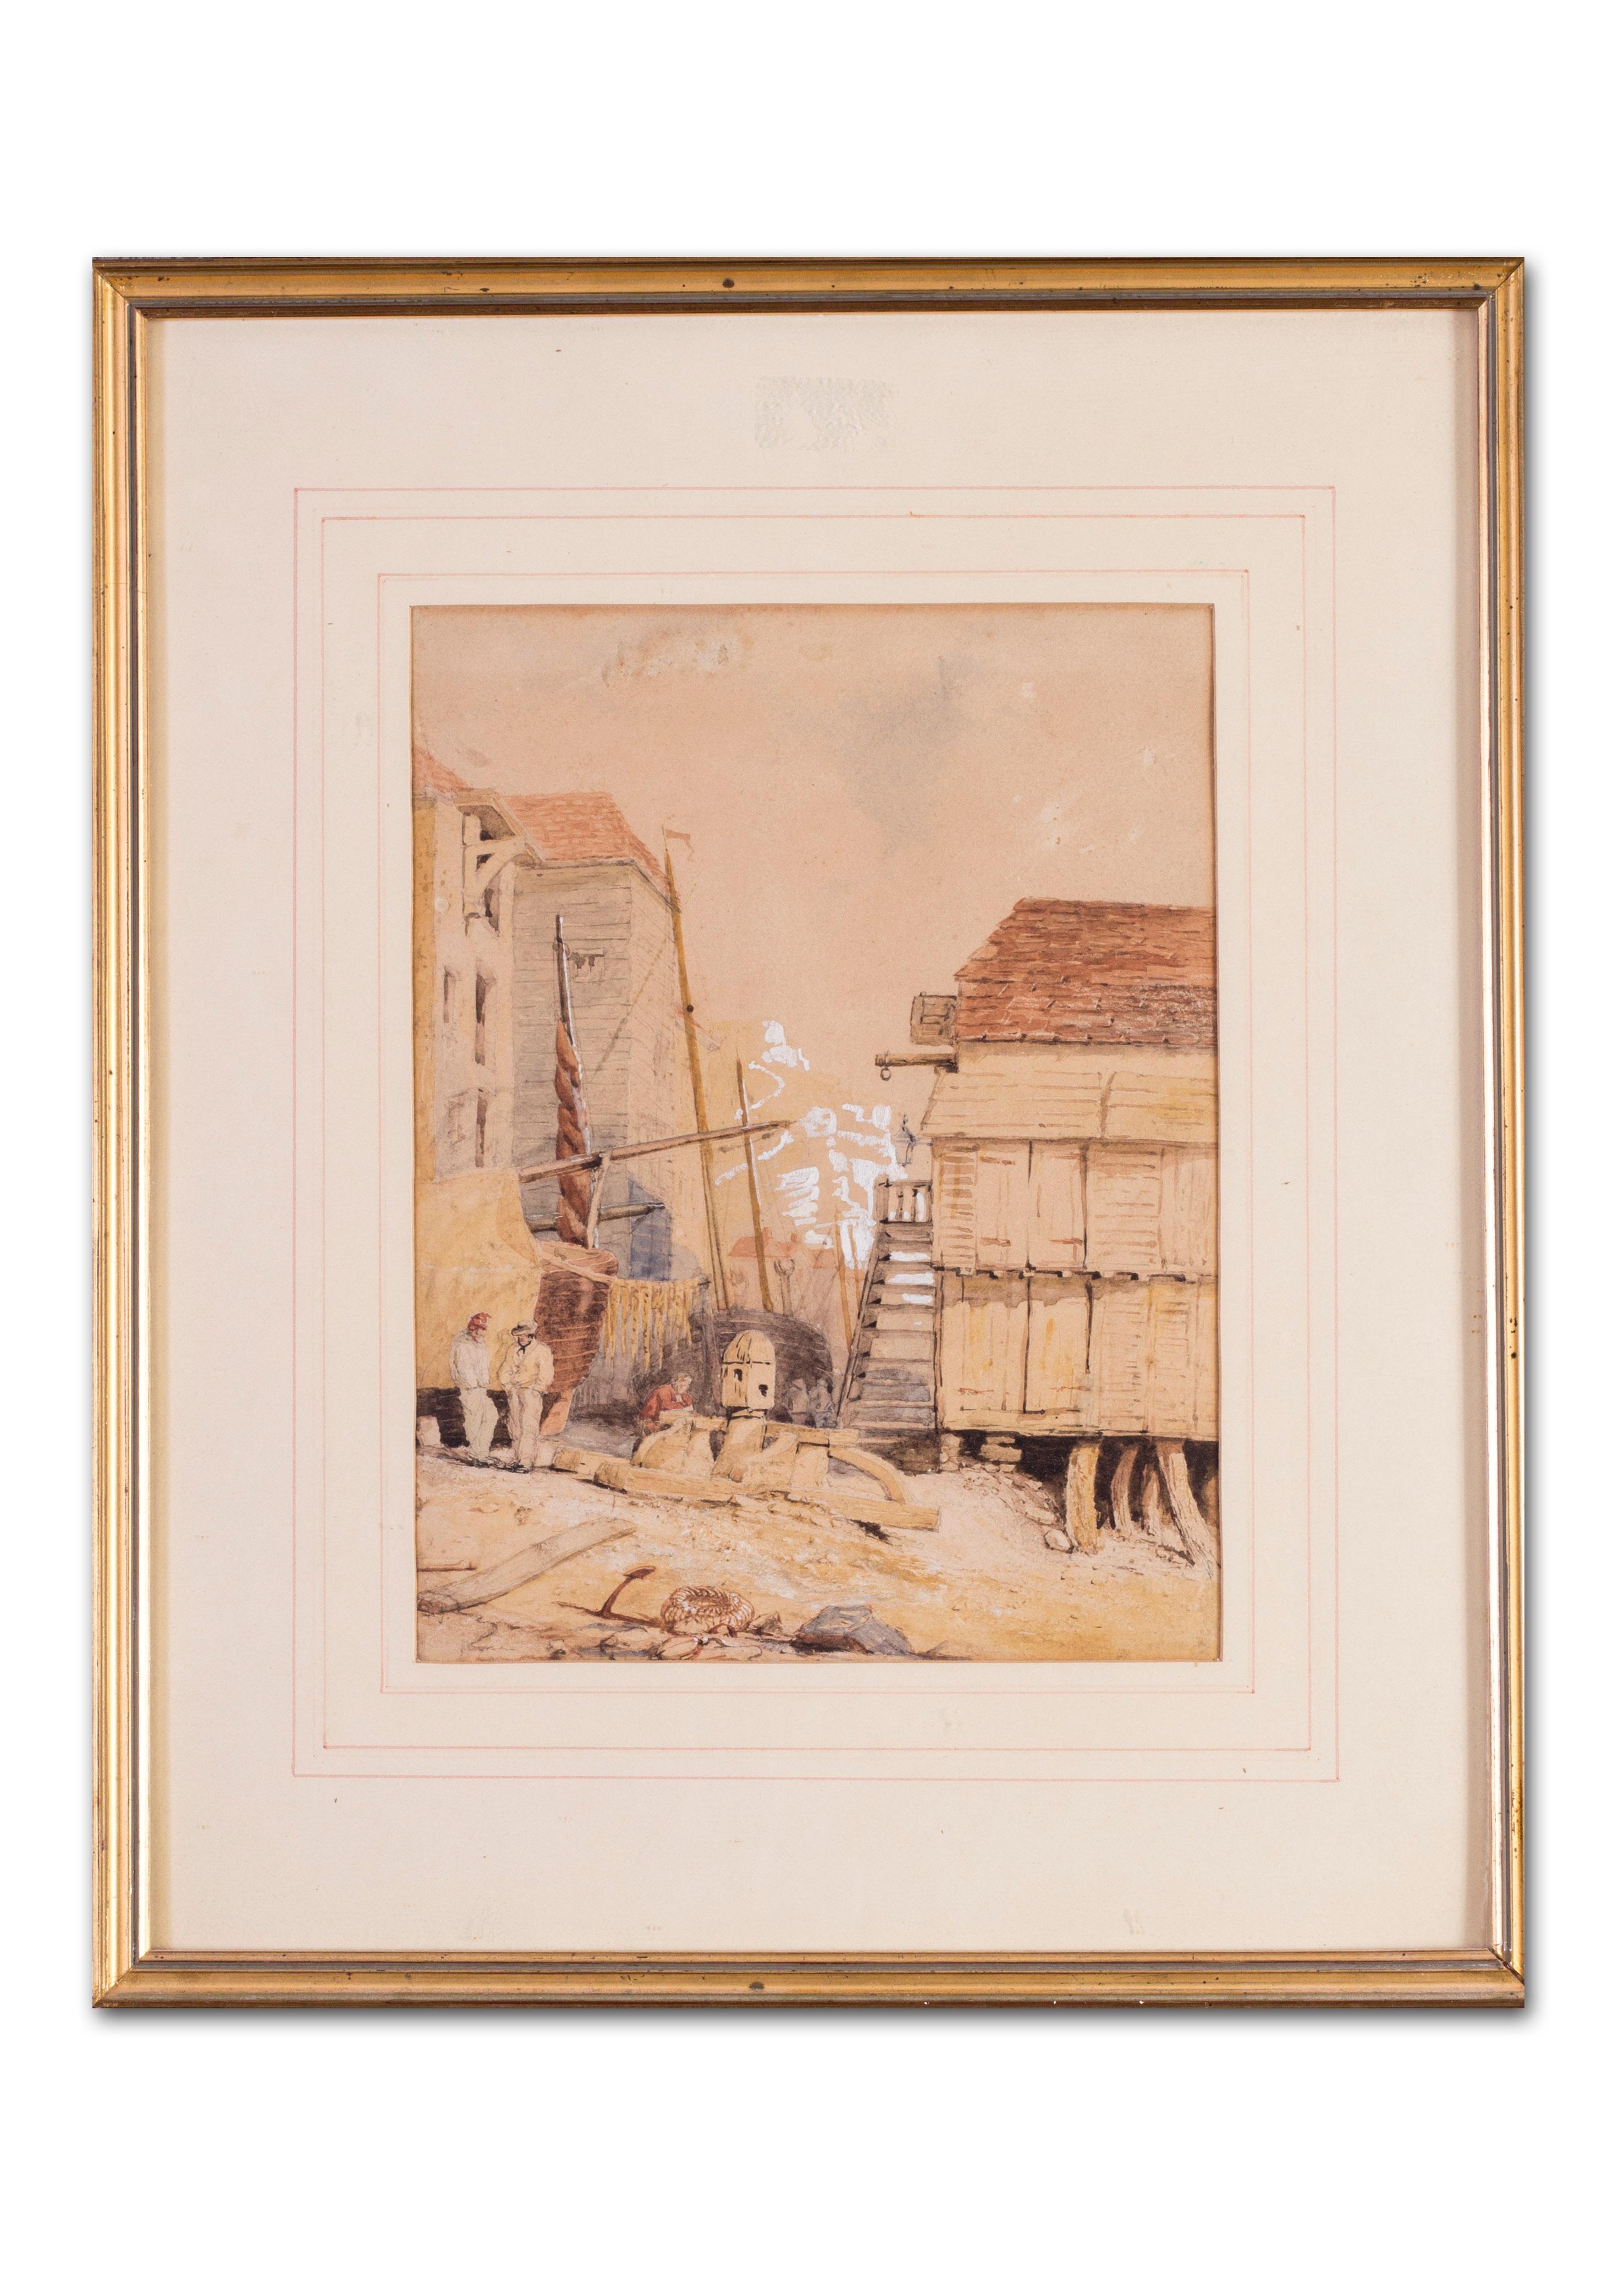 English school, 19th century
Fisherfolk by the net huts, Hastings
Pencil, pen and watercolour on paper
11.1/2 x 9 in. (29.3 x 22.5 cm.)
